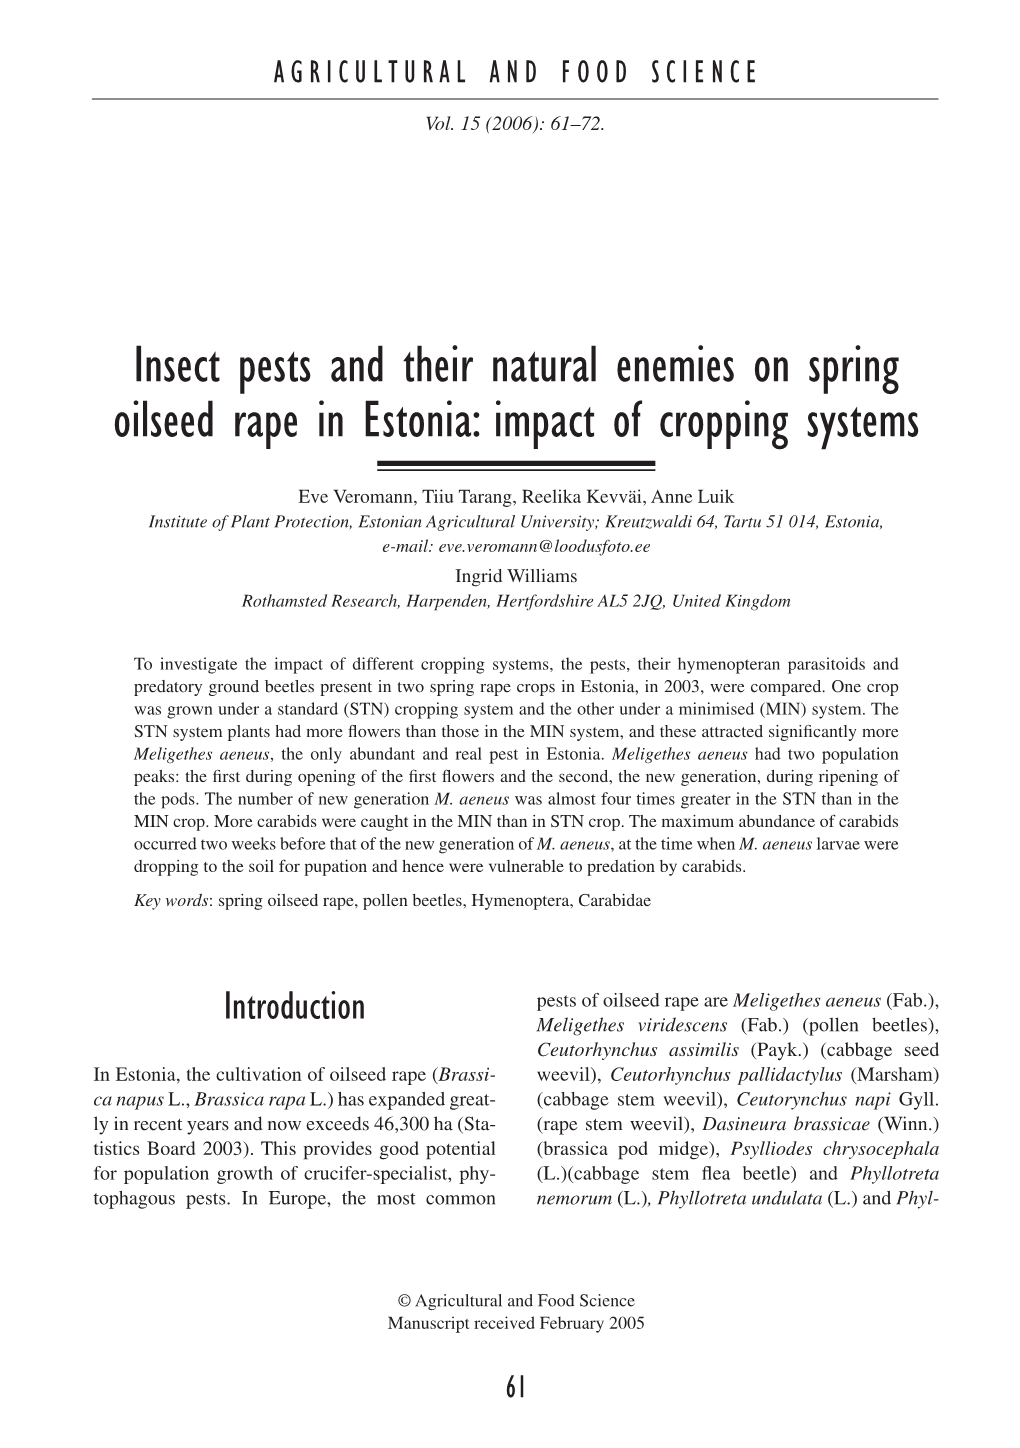 Insect Pests and Their Natural Enemies on Spring Oilseed Rape in Estonia: Impact of Cropping Systems